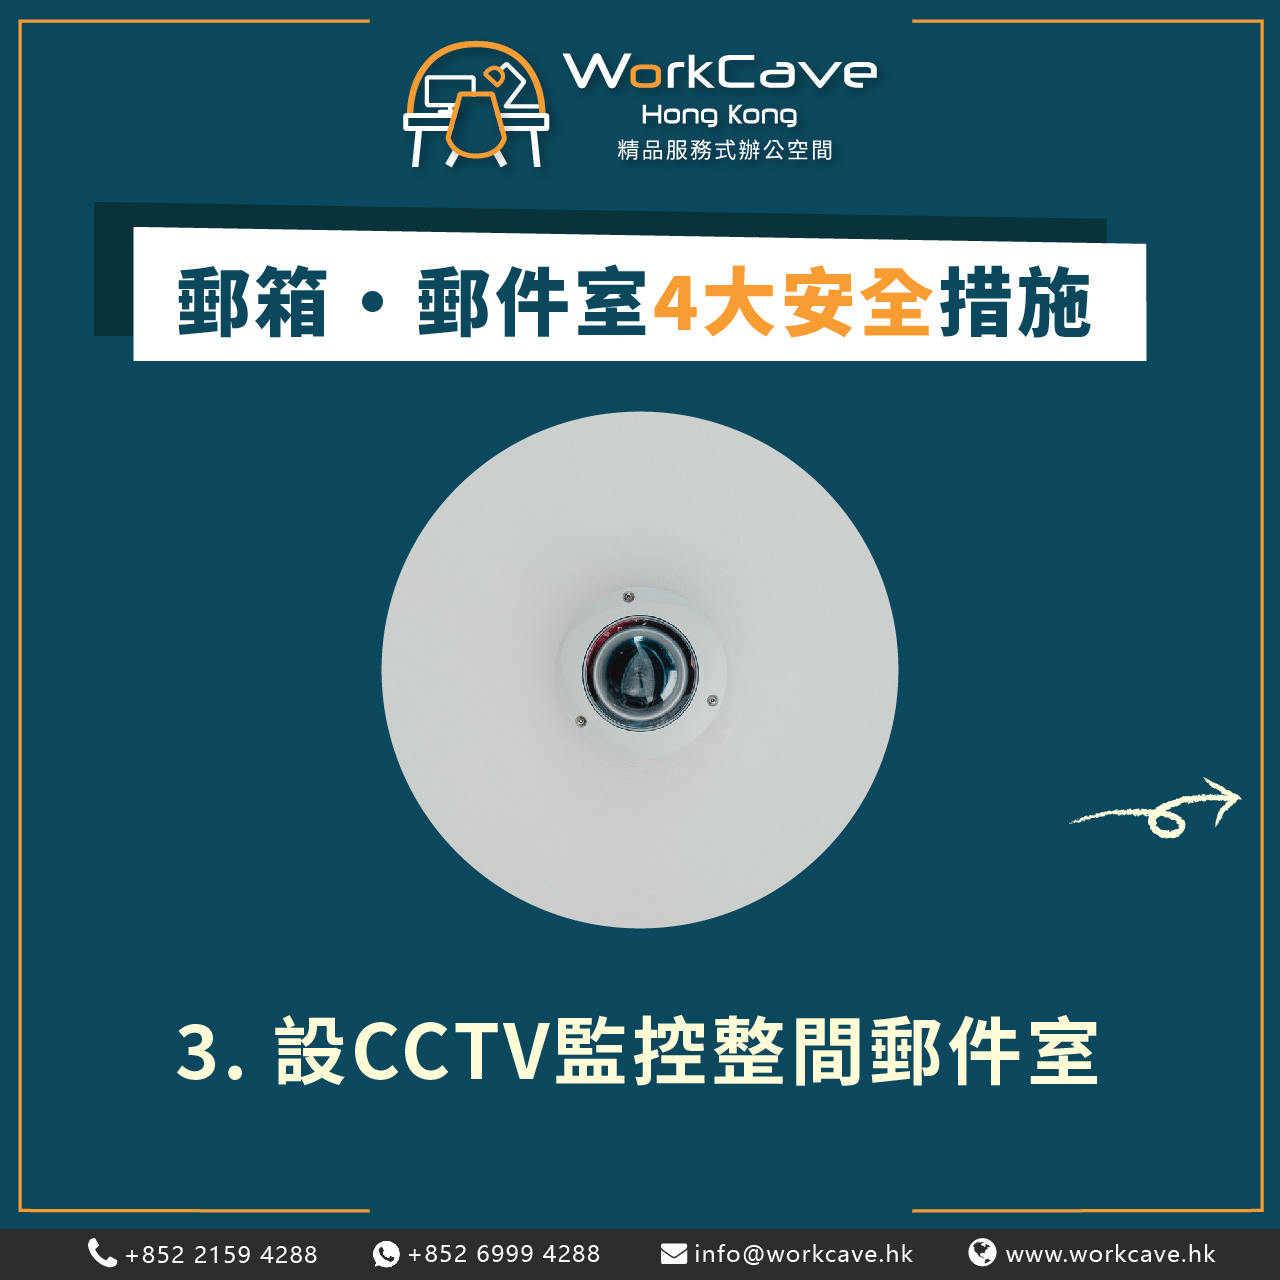 CCTV in mail room